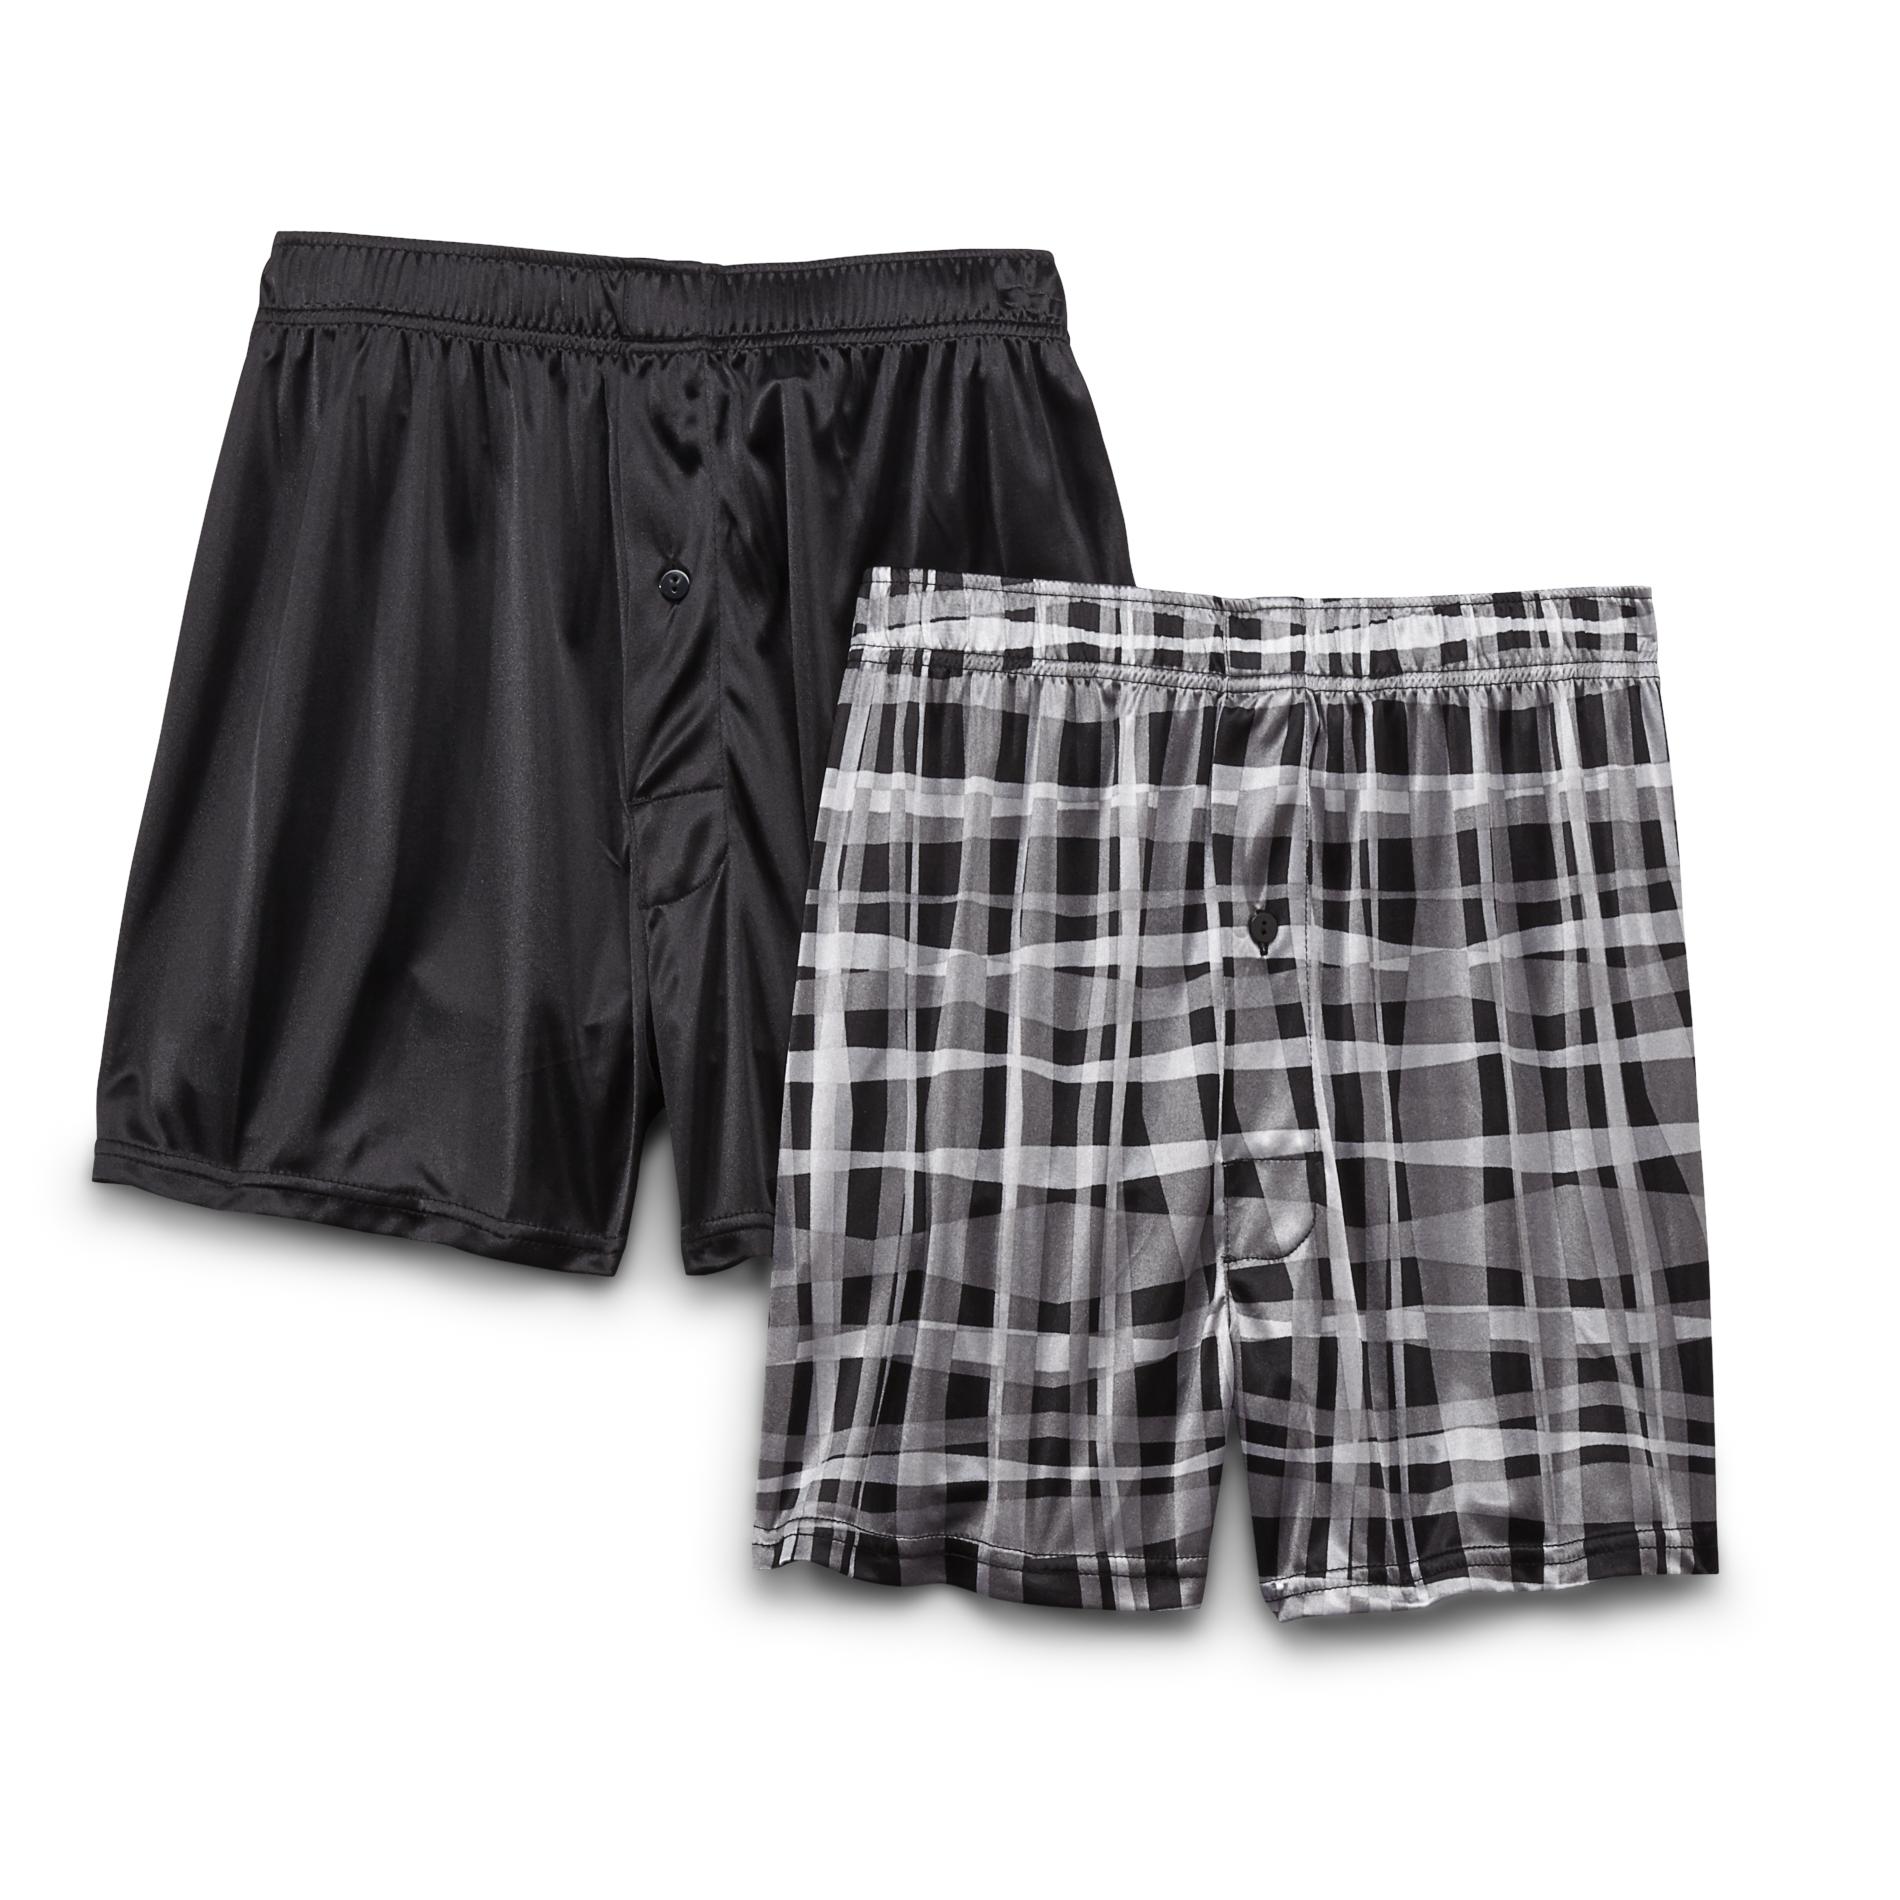 Covington Men's 2-Pack Micro-Knit Boxers - Abstract Plaid